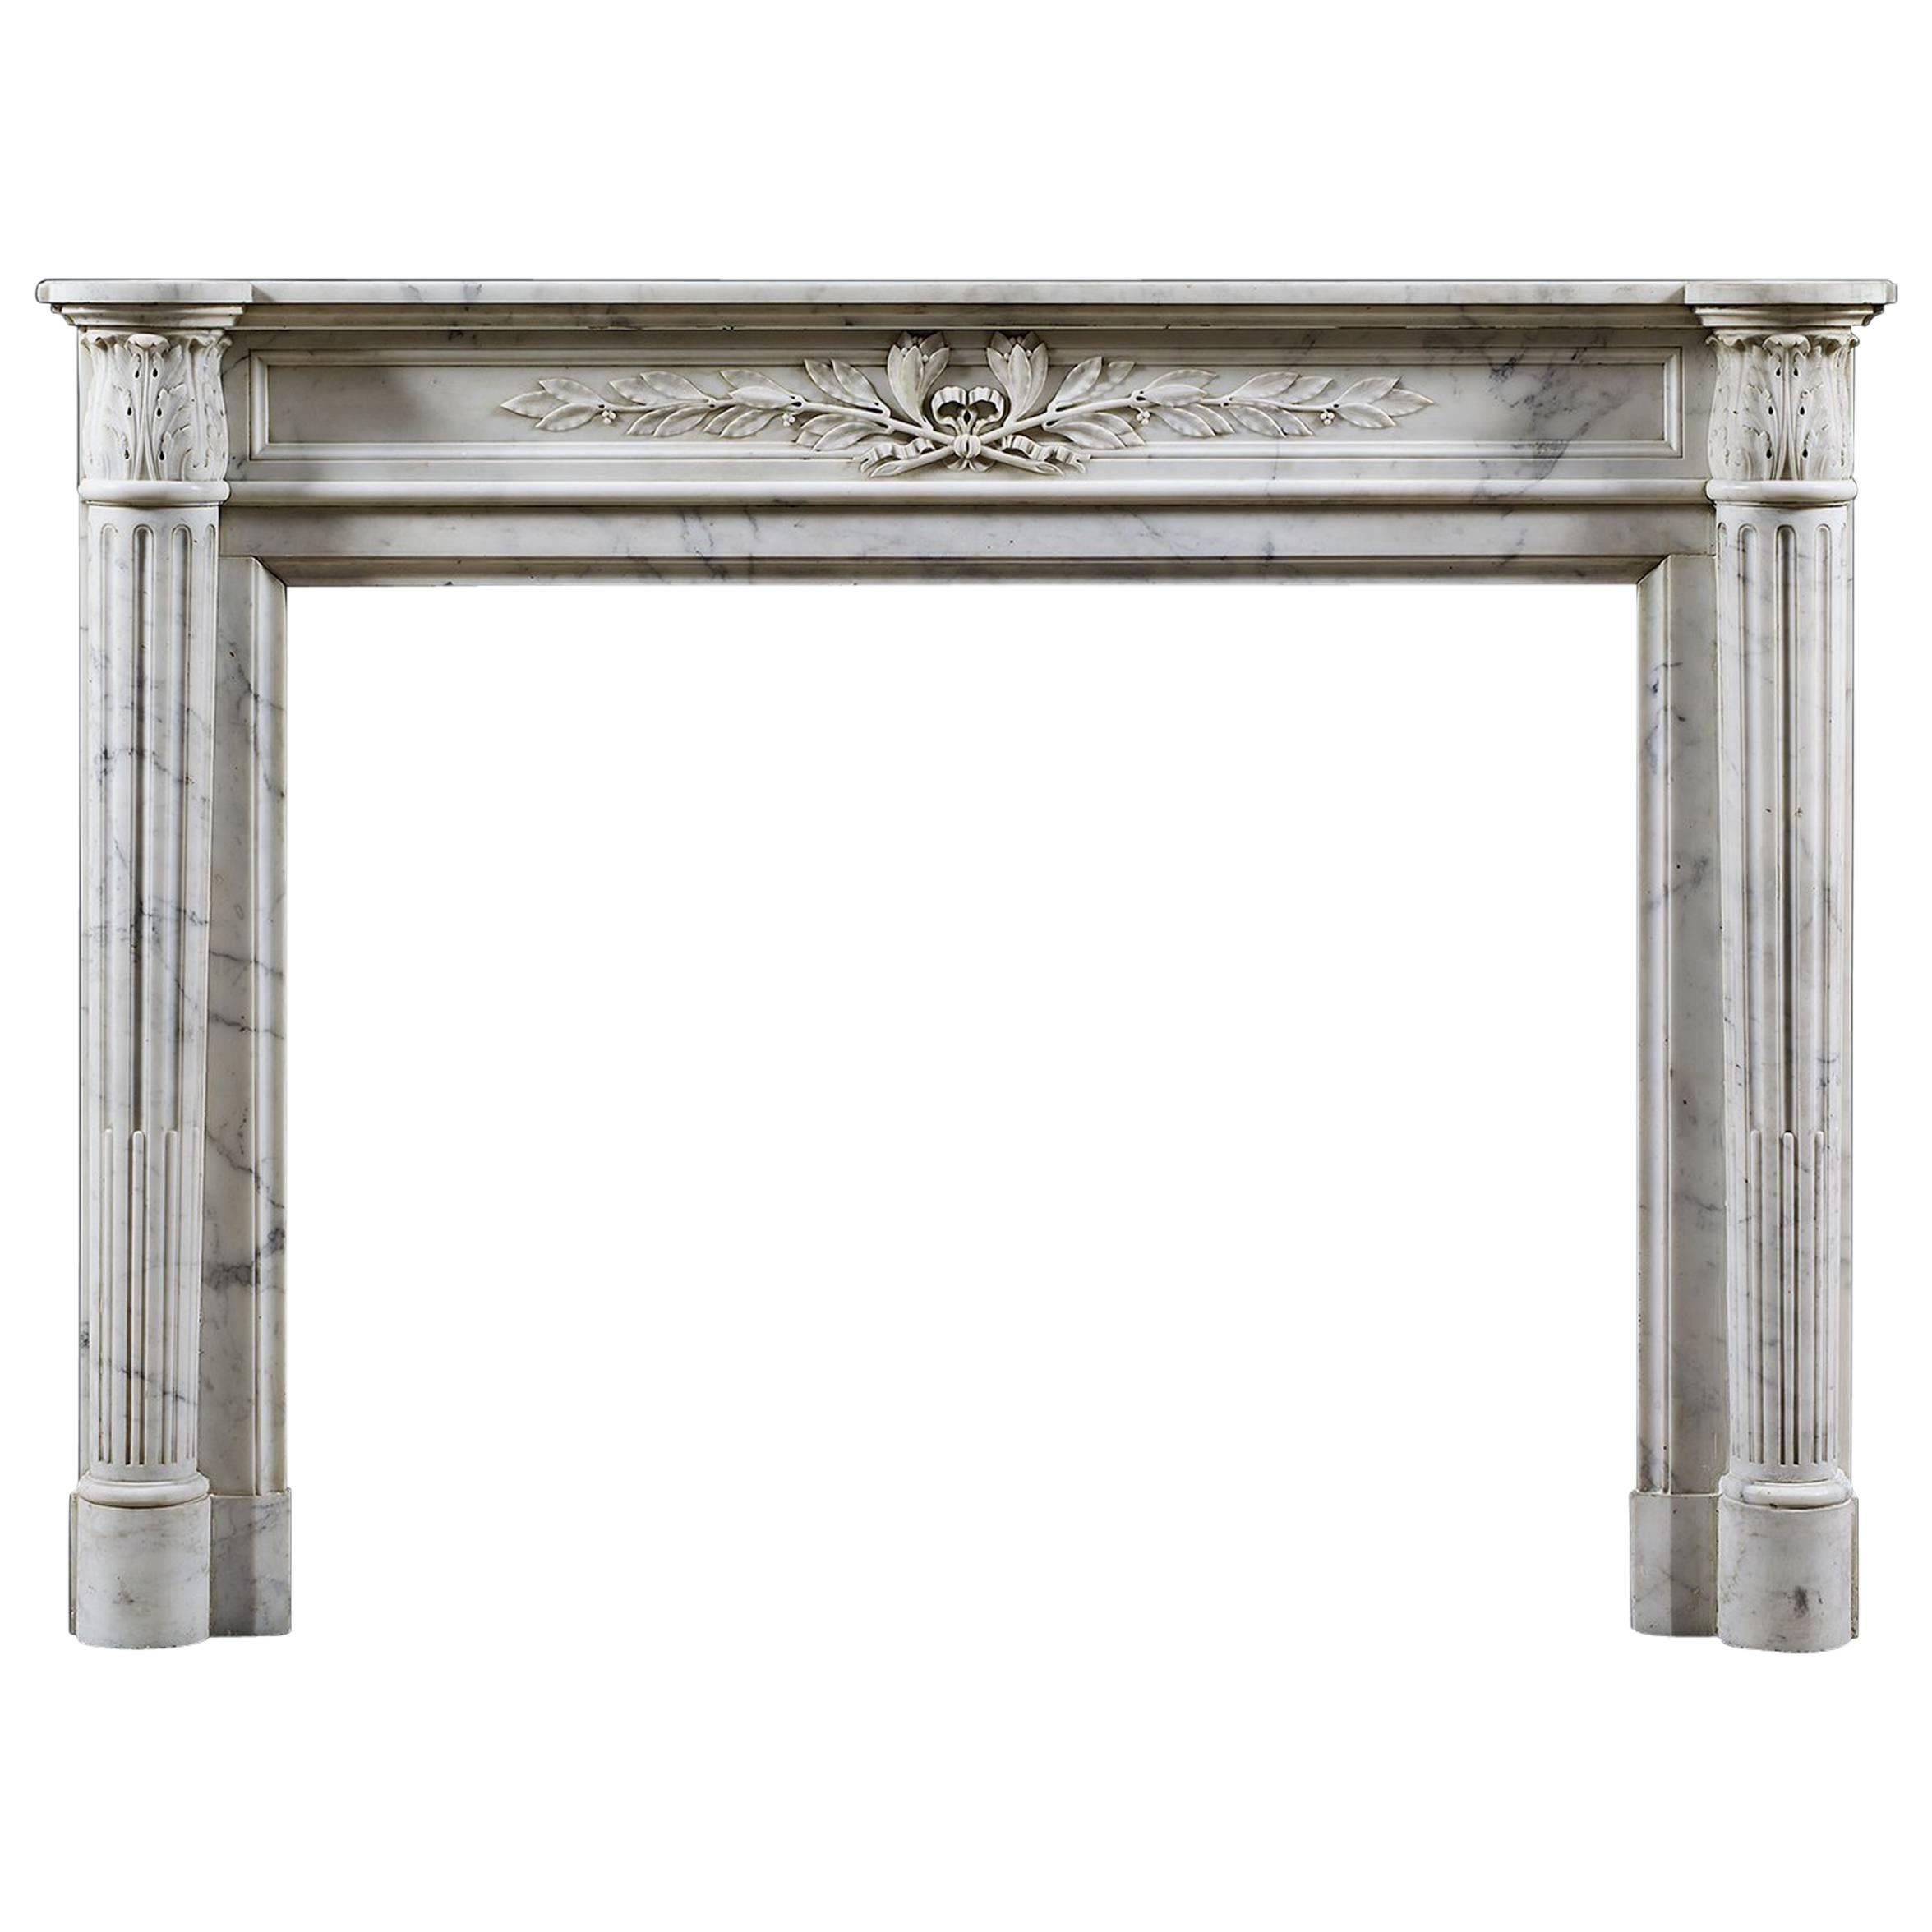 Antique French, Louis XVI Carrara Marble Fireplace Mantle